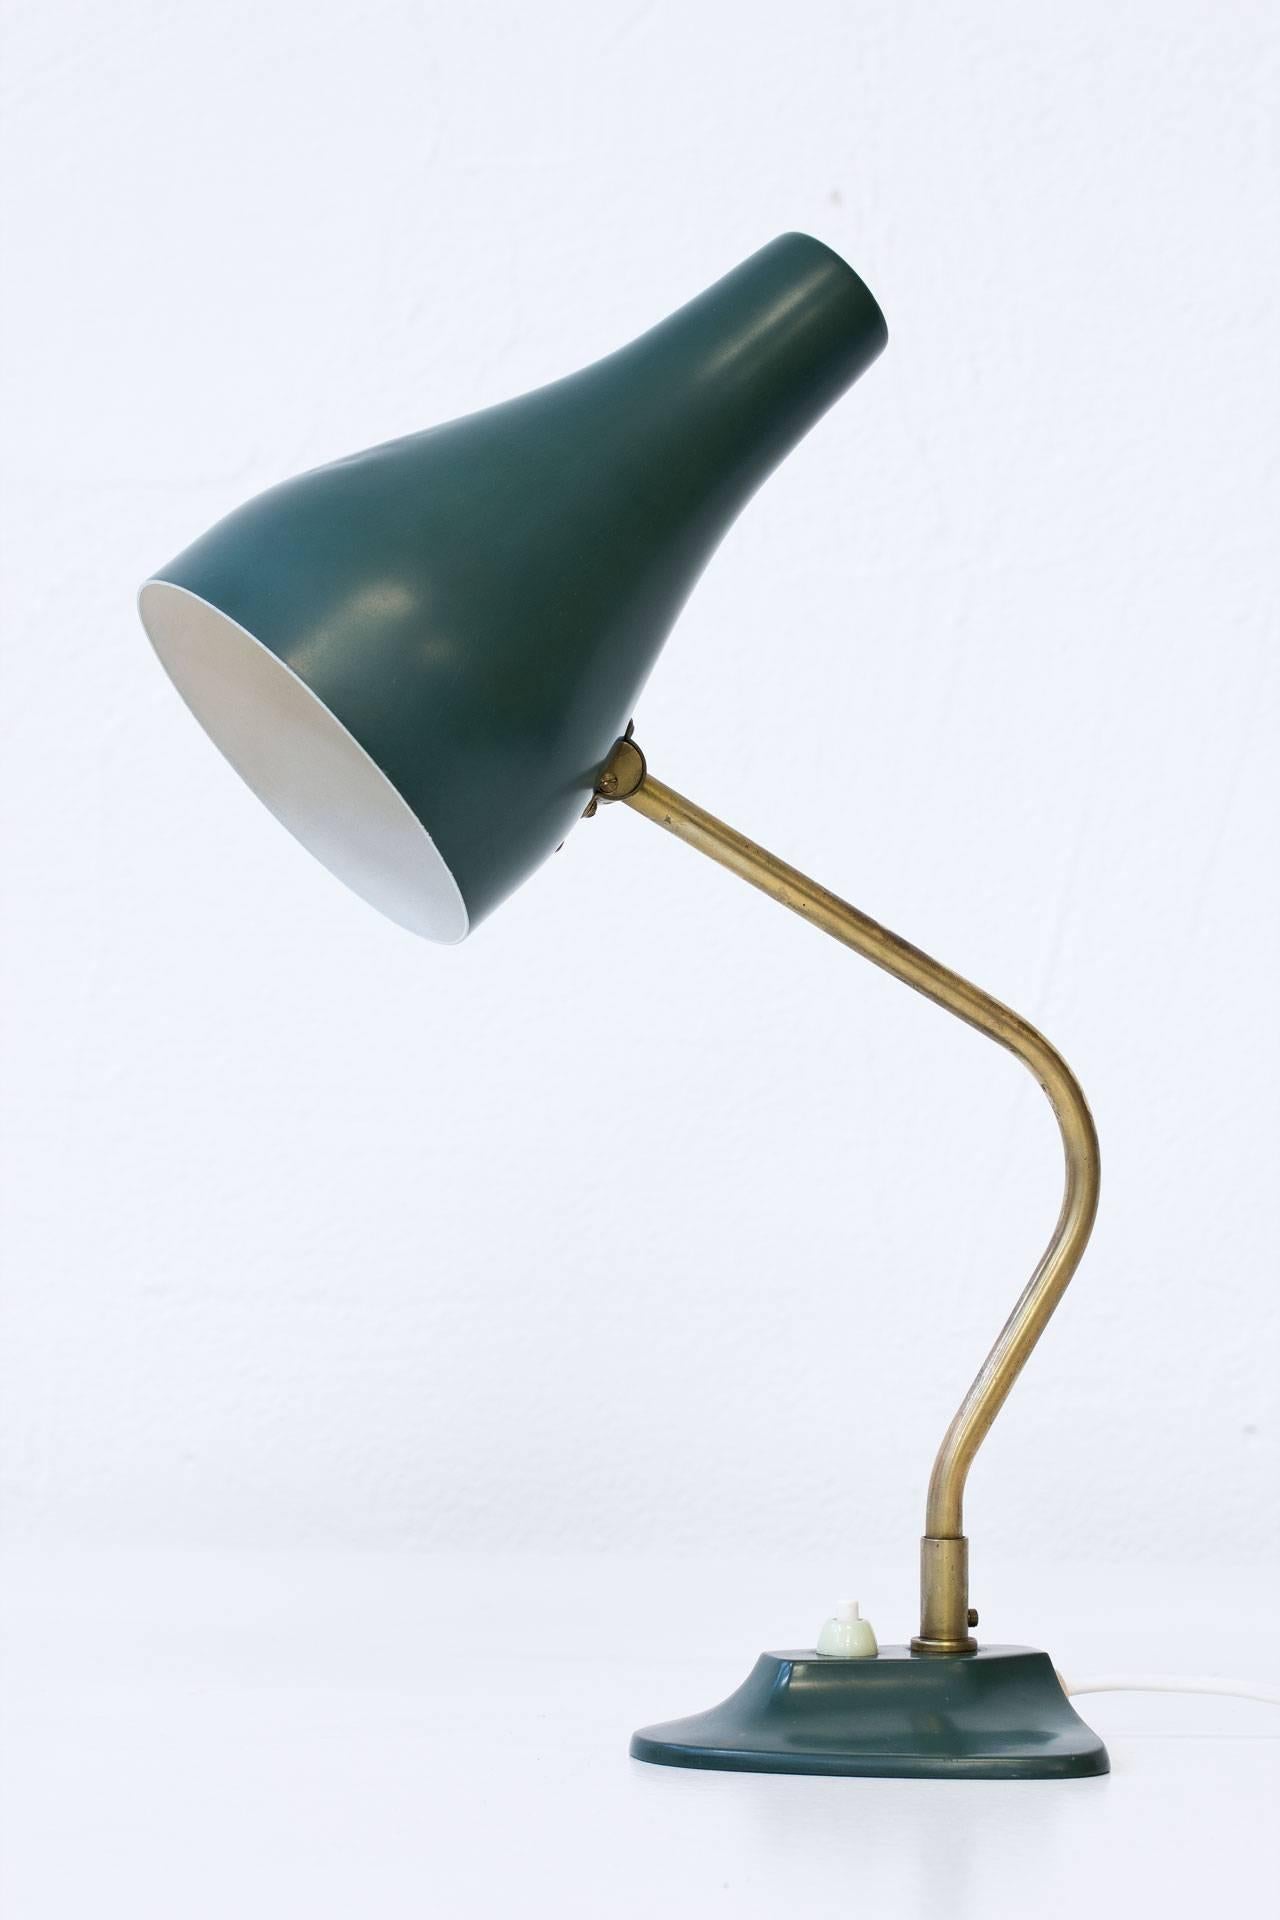 Swedish table lamp produced by ASEA during the 1950s. Brass stem with diffuser and
base in green painted metal. Adjustable shade and axis. Signed on bottom.